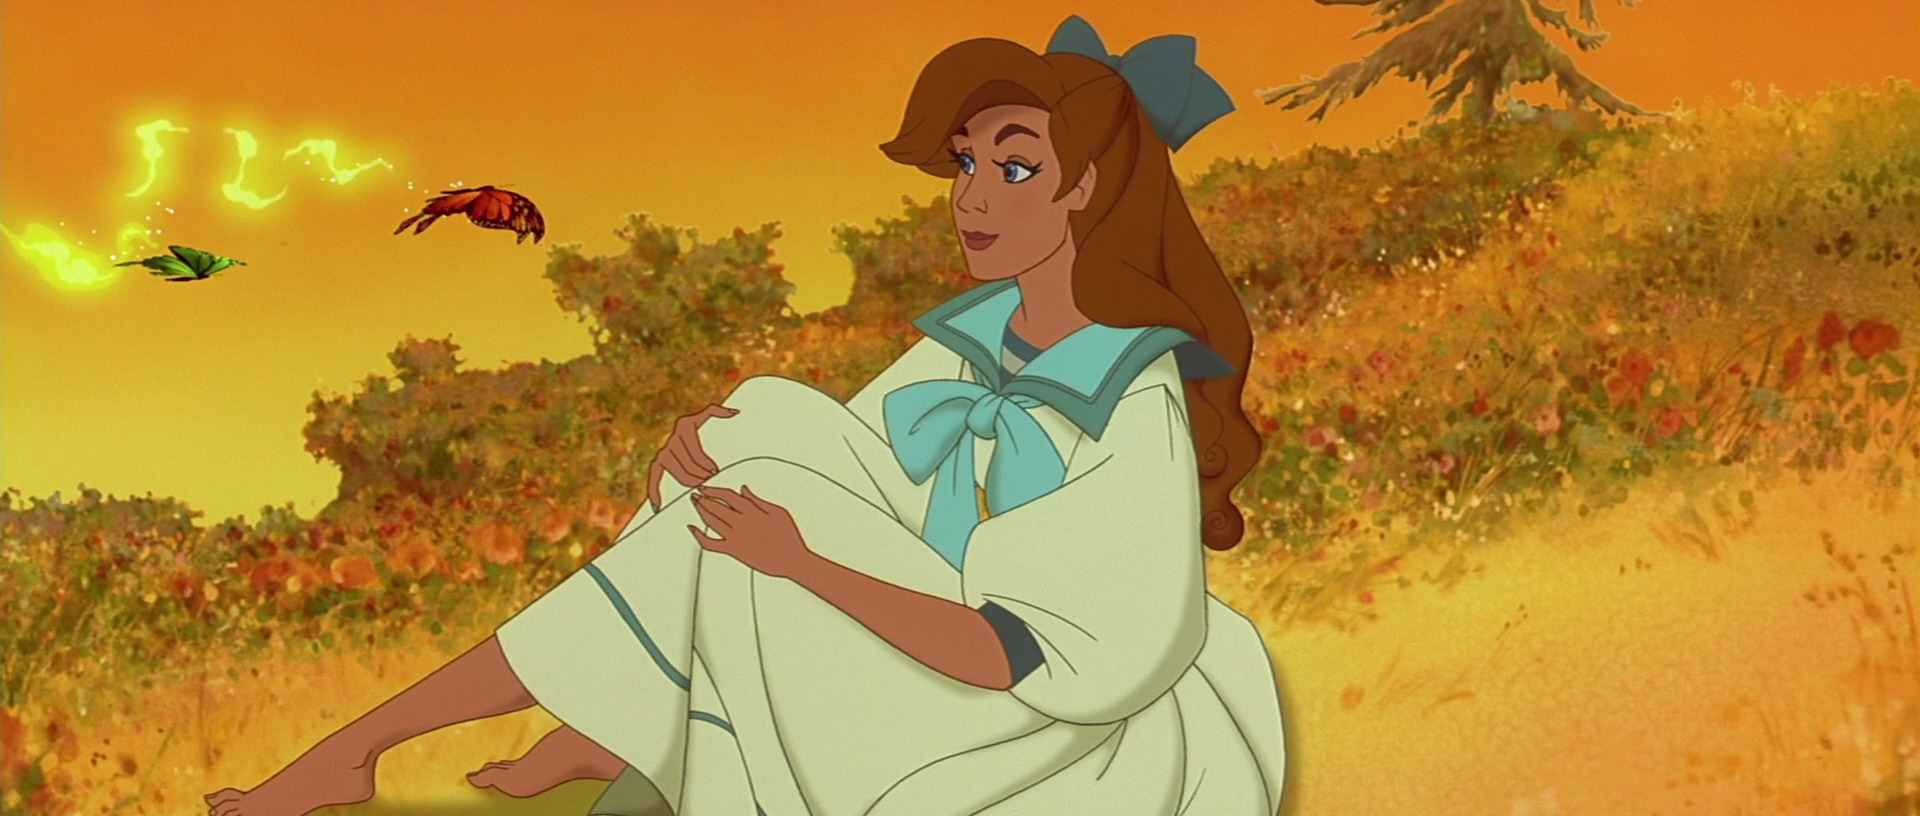 Anastasia (character), The Don Bluth Wiki